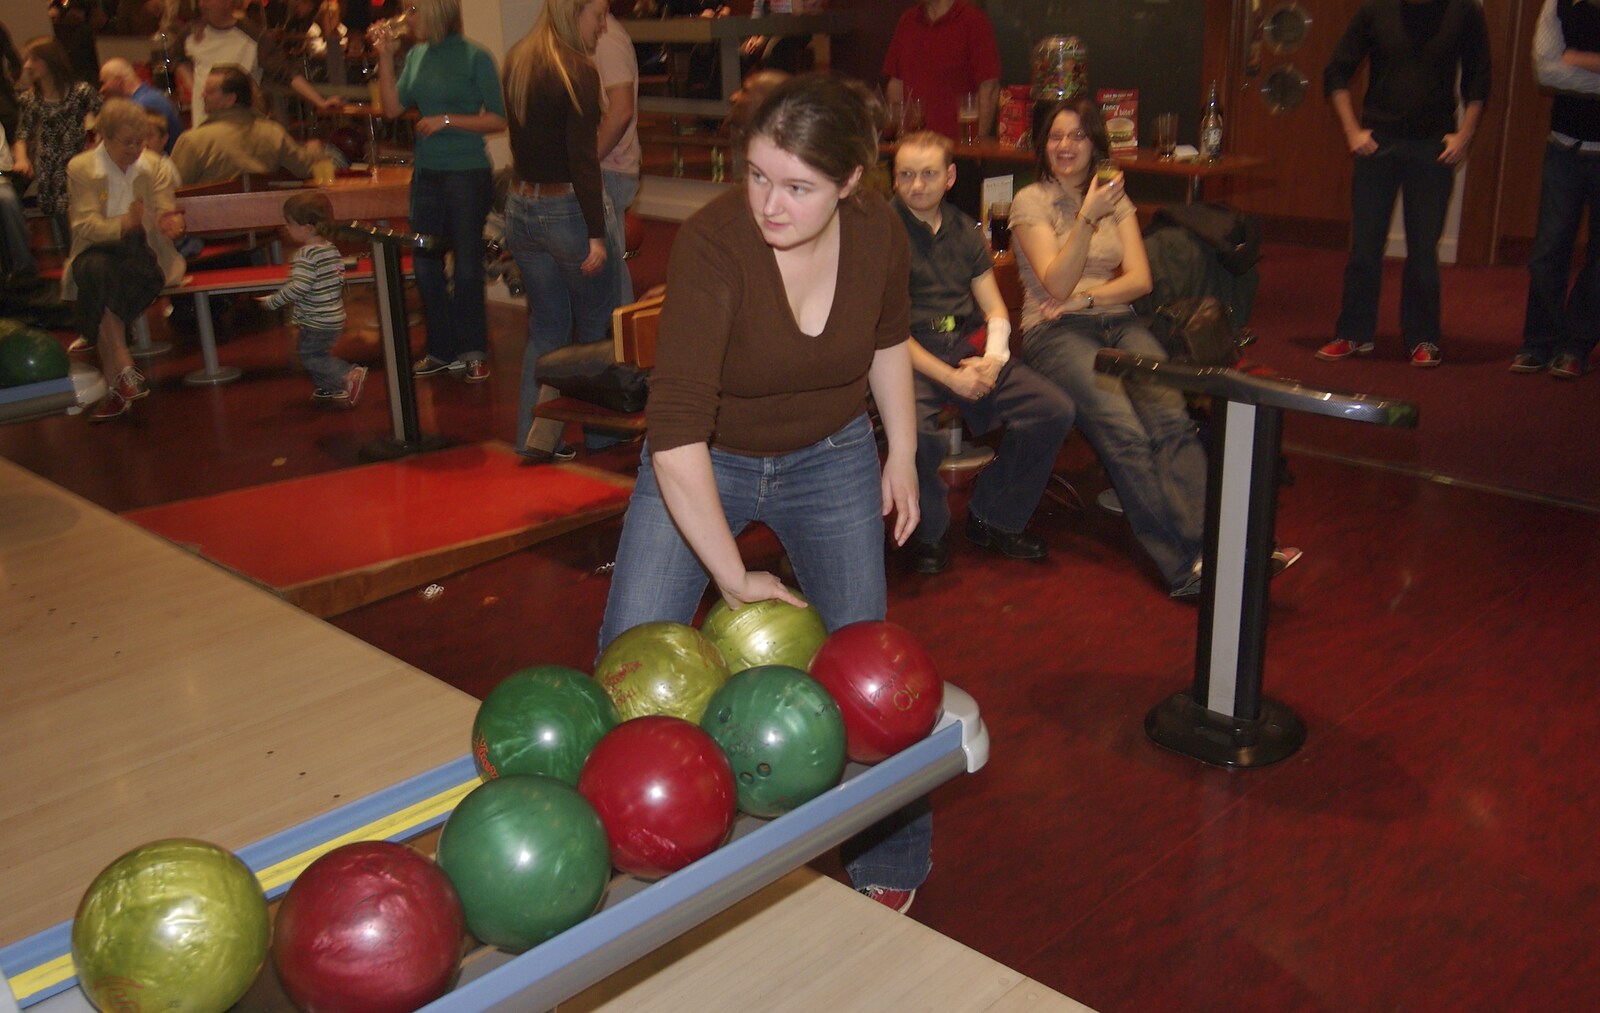 Isobel grabs the next ball from Ten-pin Bowling and Birthdays, Cambridge Leisure Park, Cambridge - 17th February 2007